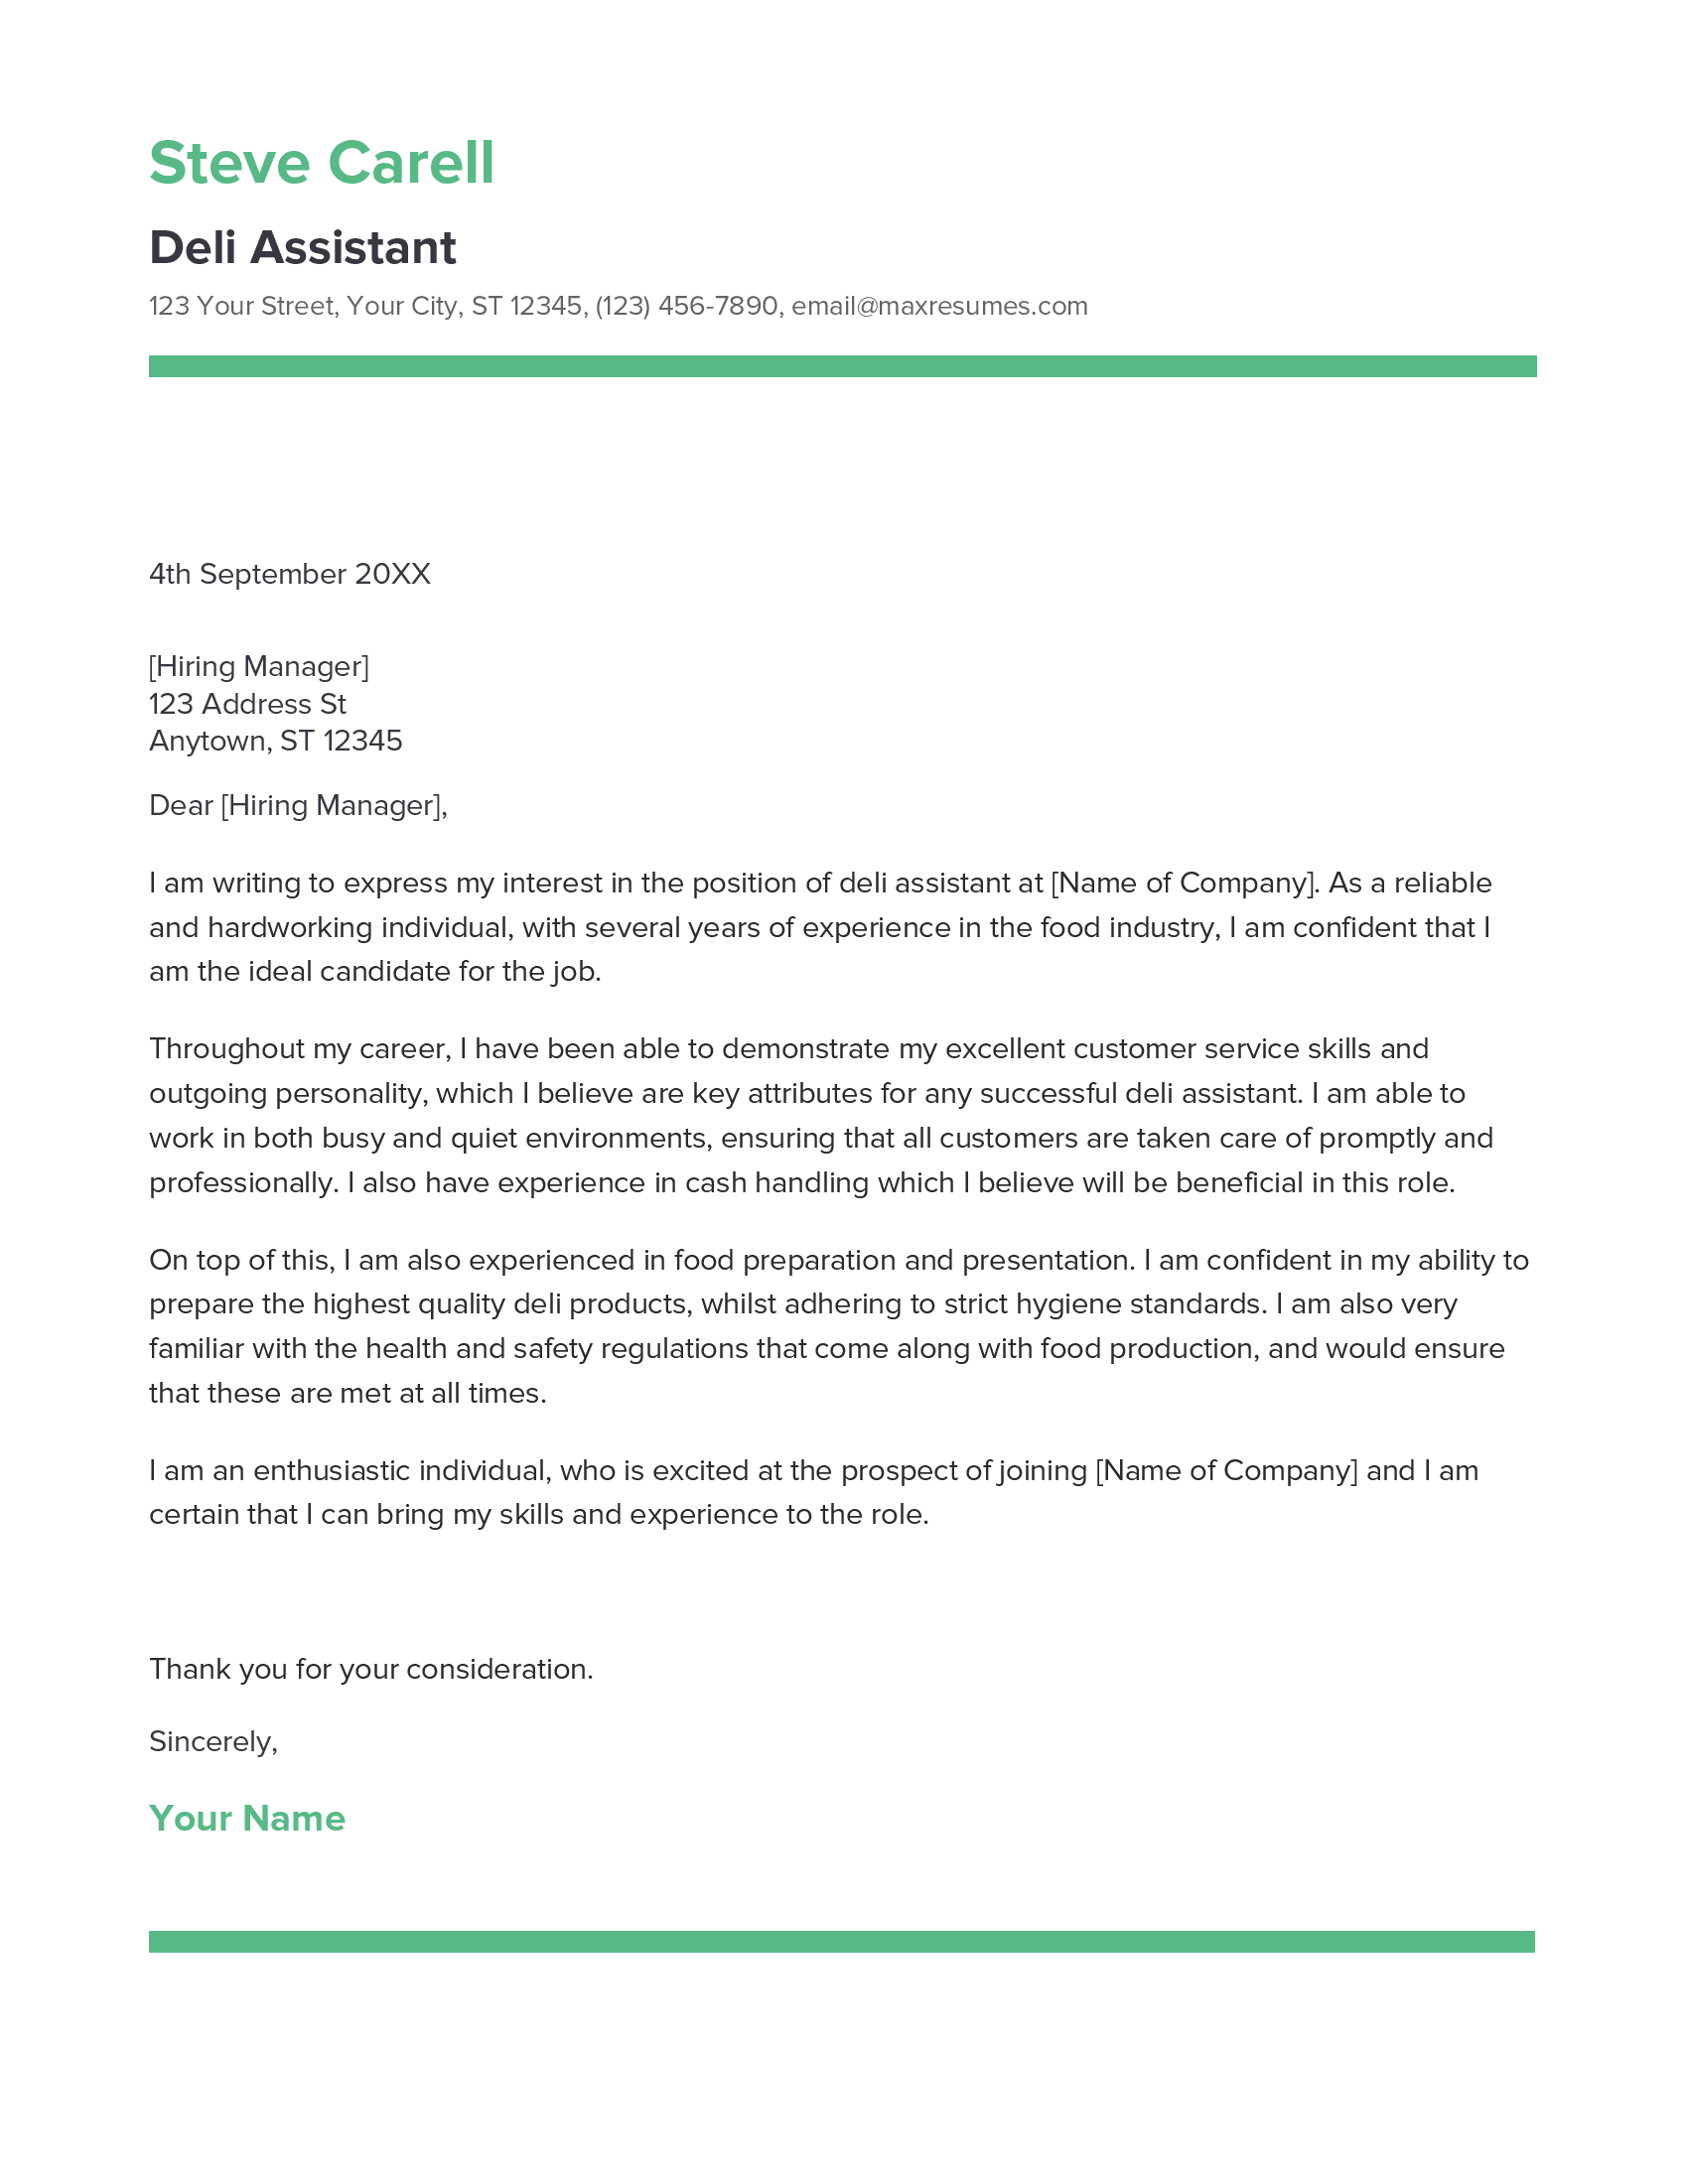 Deli Assistant Cover Letter Example